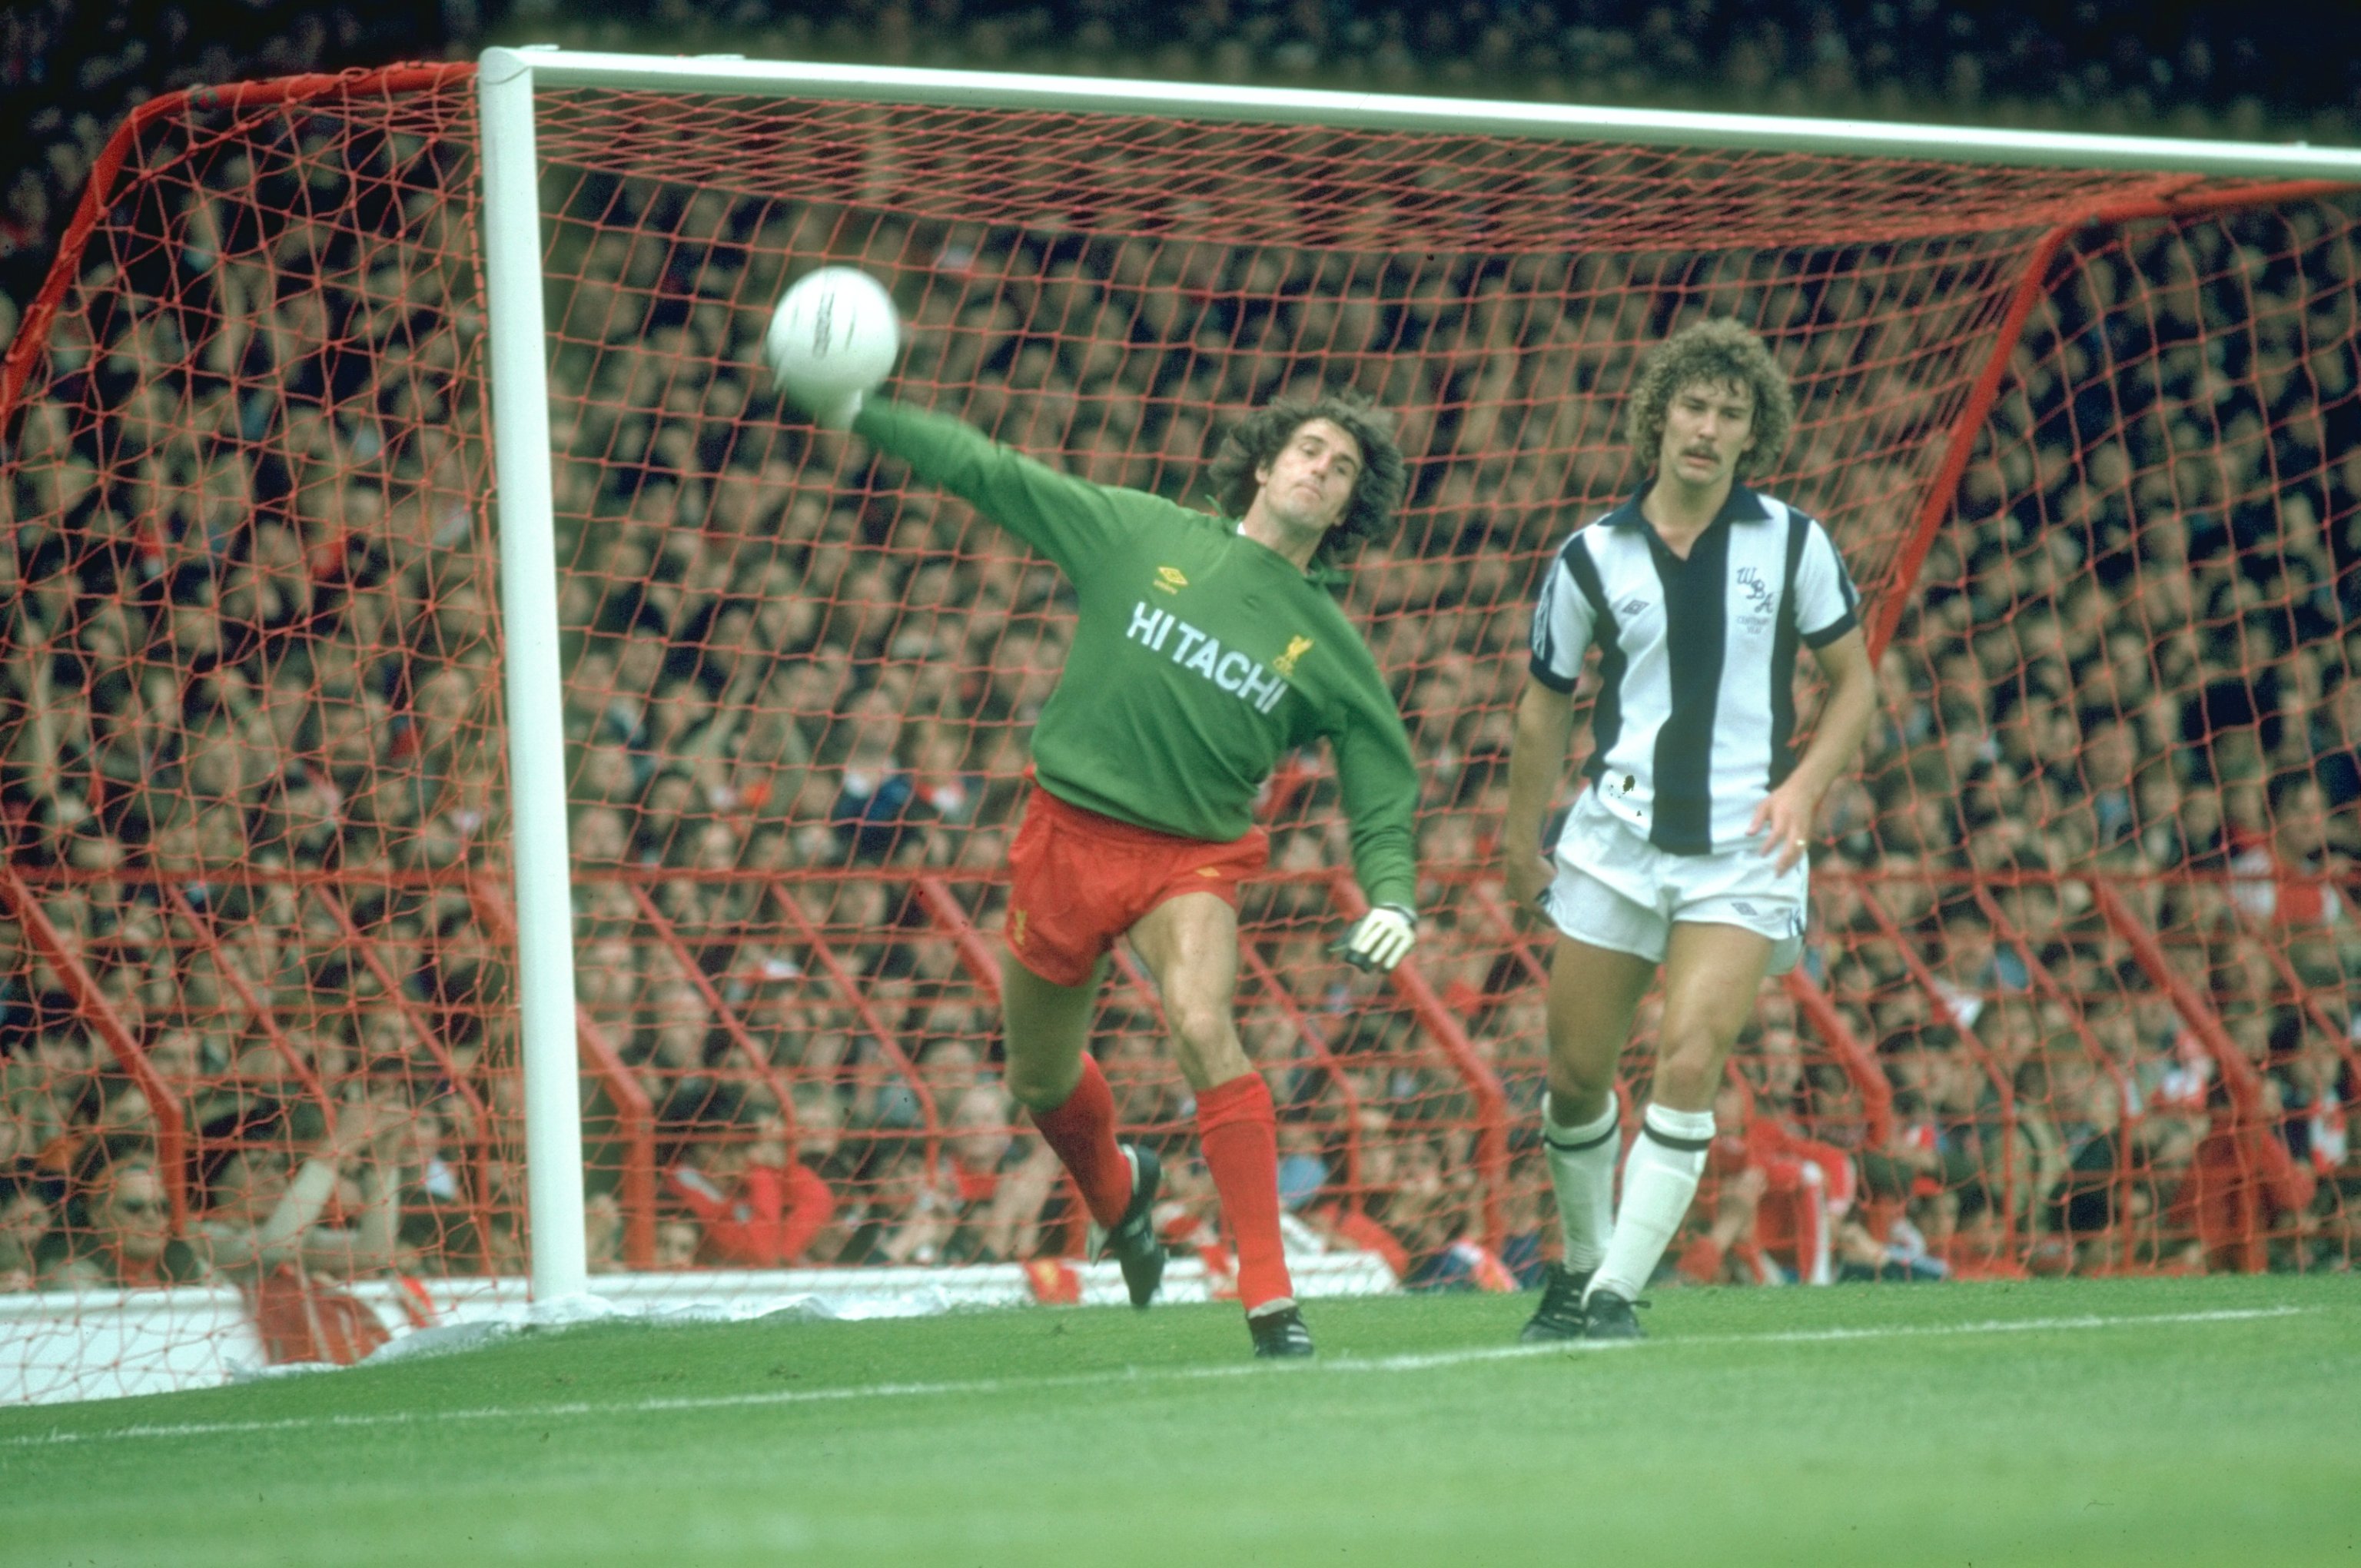 1980:  Liverpool Goalkeeper Ray Clemence throws upfield during a match against West Bromwich Albion at Anfield in Liverpool, England \ Mandatory Credit: Allsport UK /Allsport